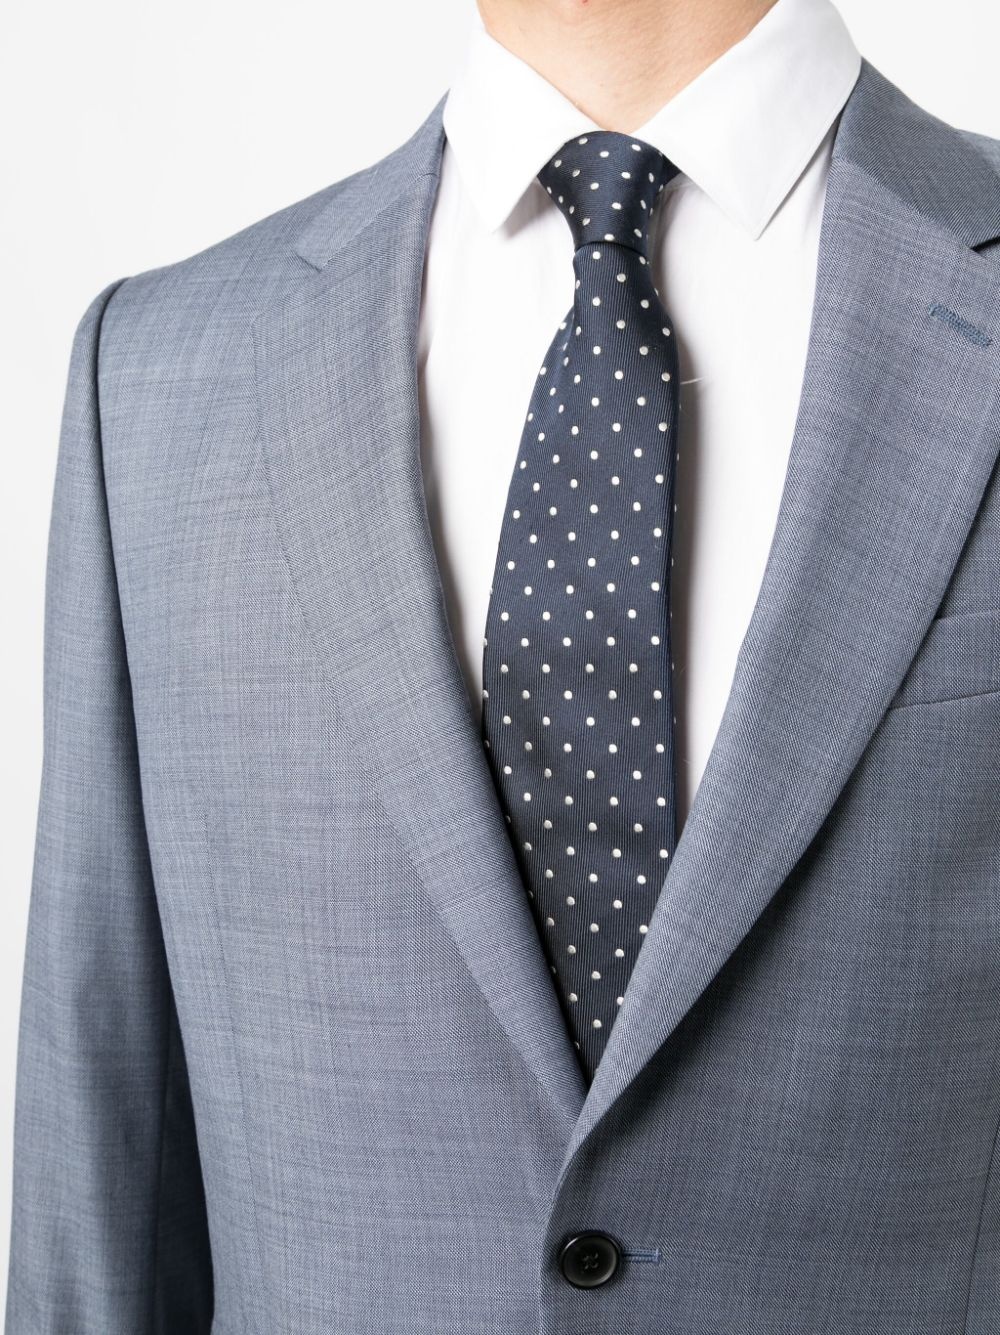 single-breasted wool suit - 5